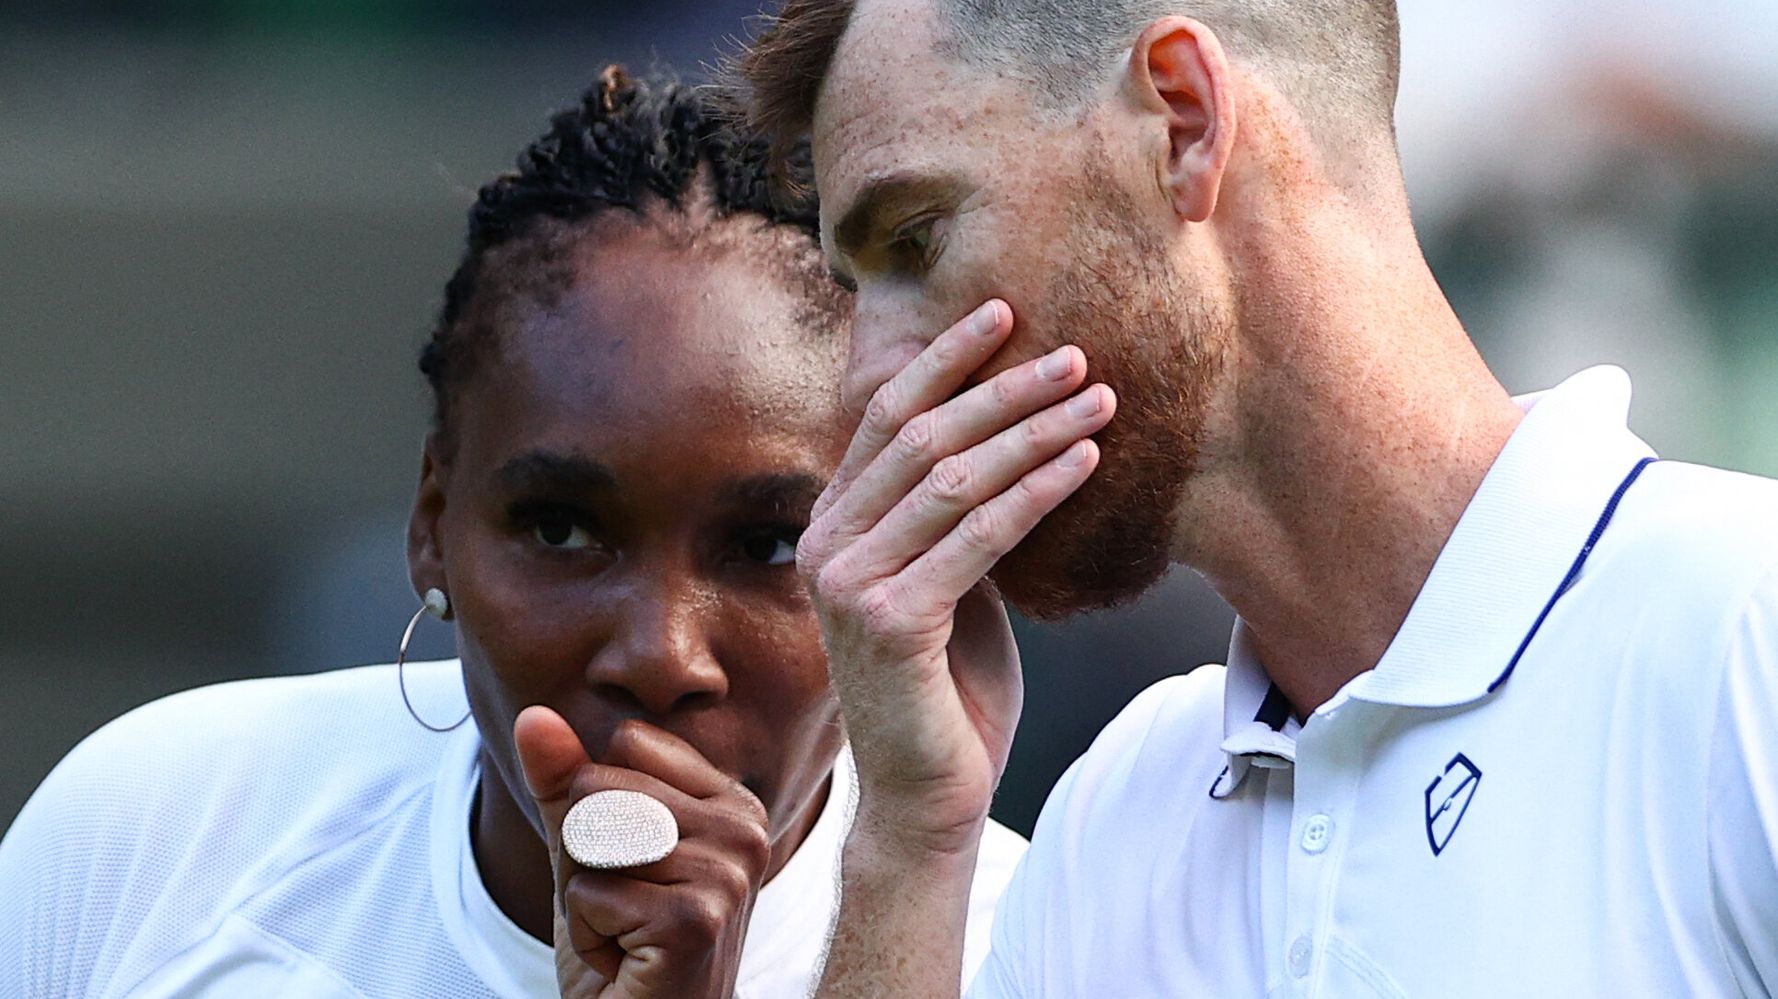 Venus Williams Has Perfect Response To Tennis Reporter's Ridiculous Question - HuffPost